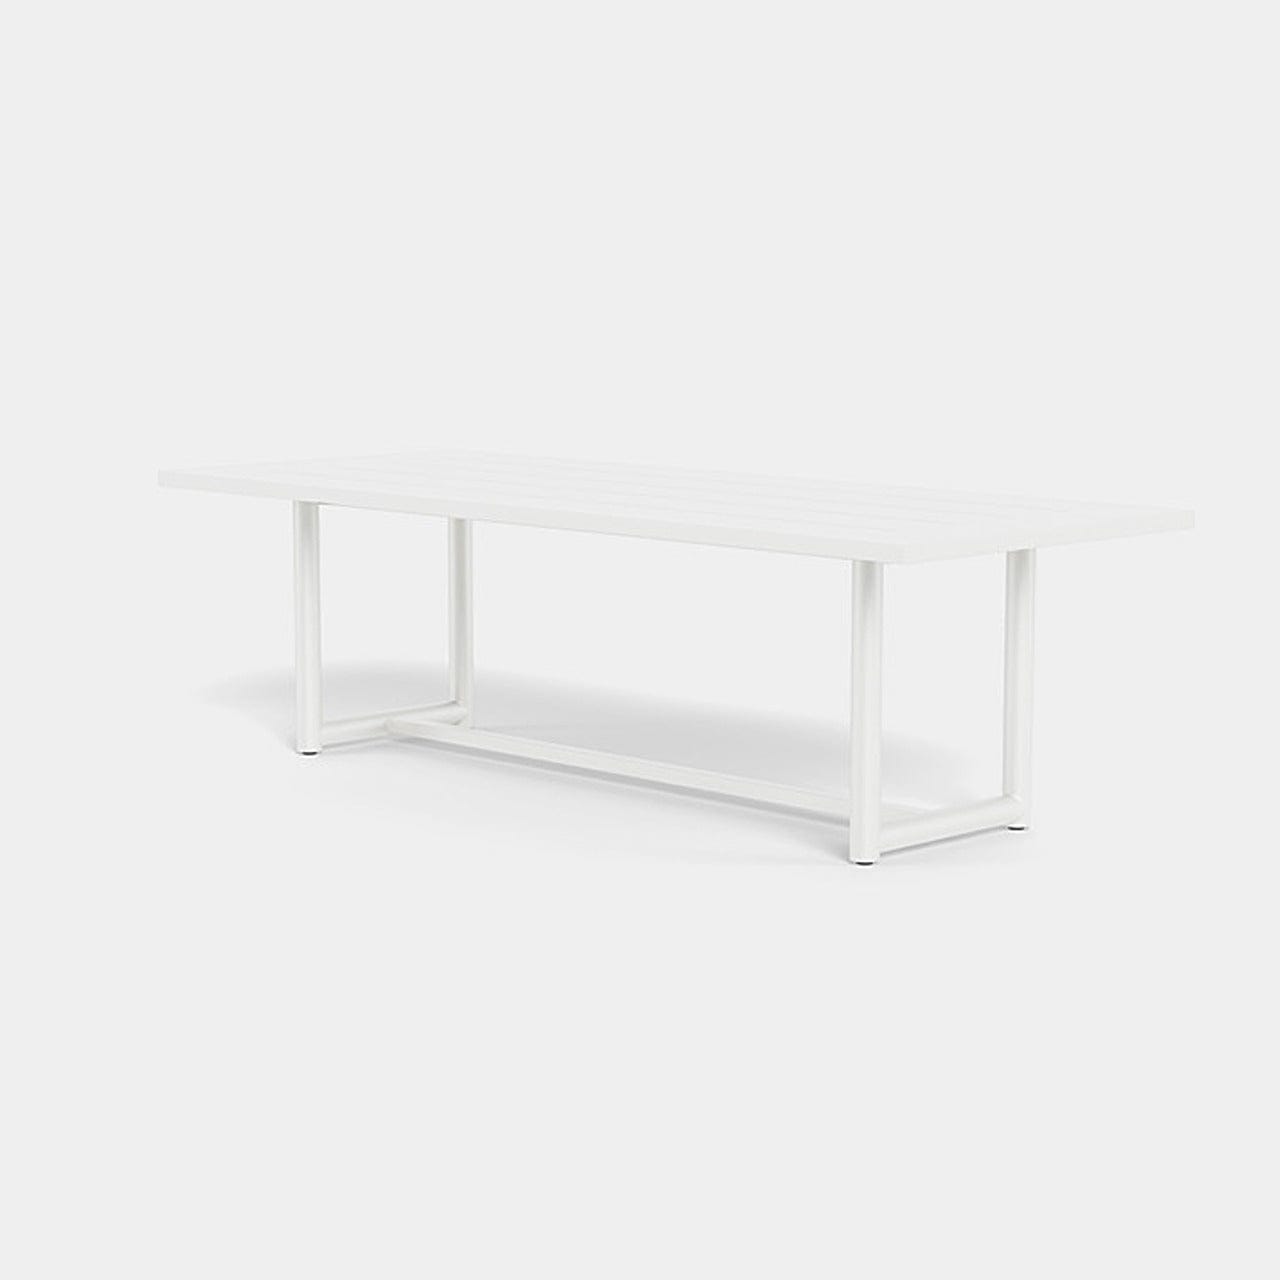 Breeze XL Dining Table 102"